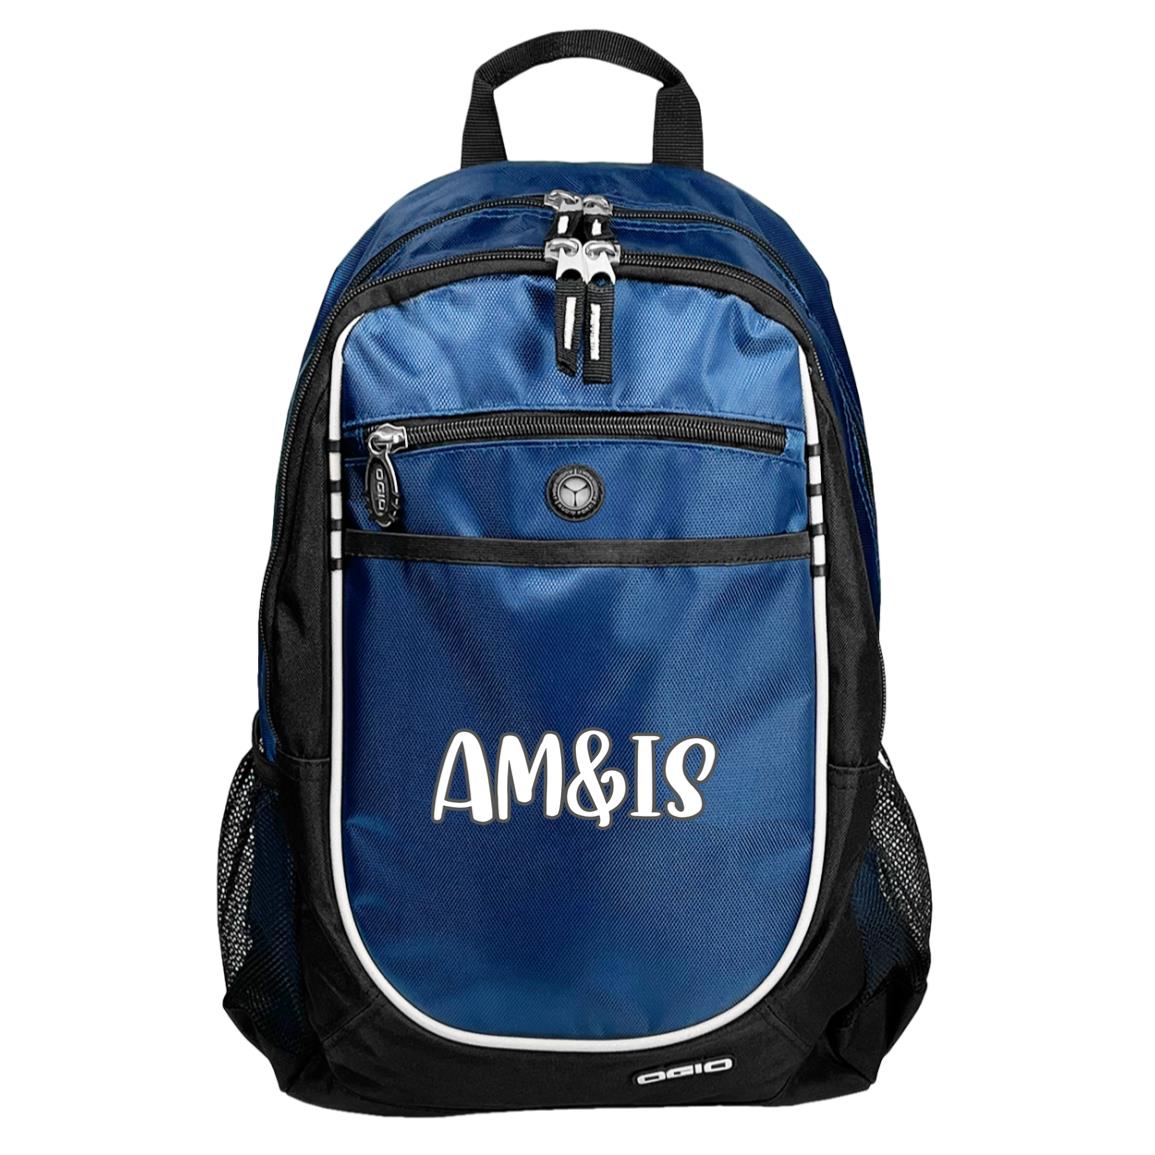 ROYAL ONE SIZE - AM&IS Activewear Rugged Bookbag - backpack at TFC&H Co.